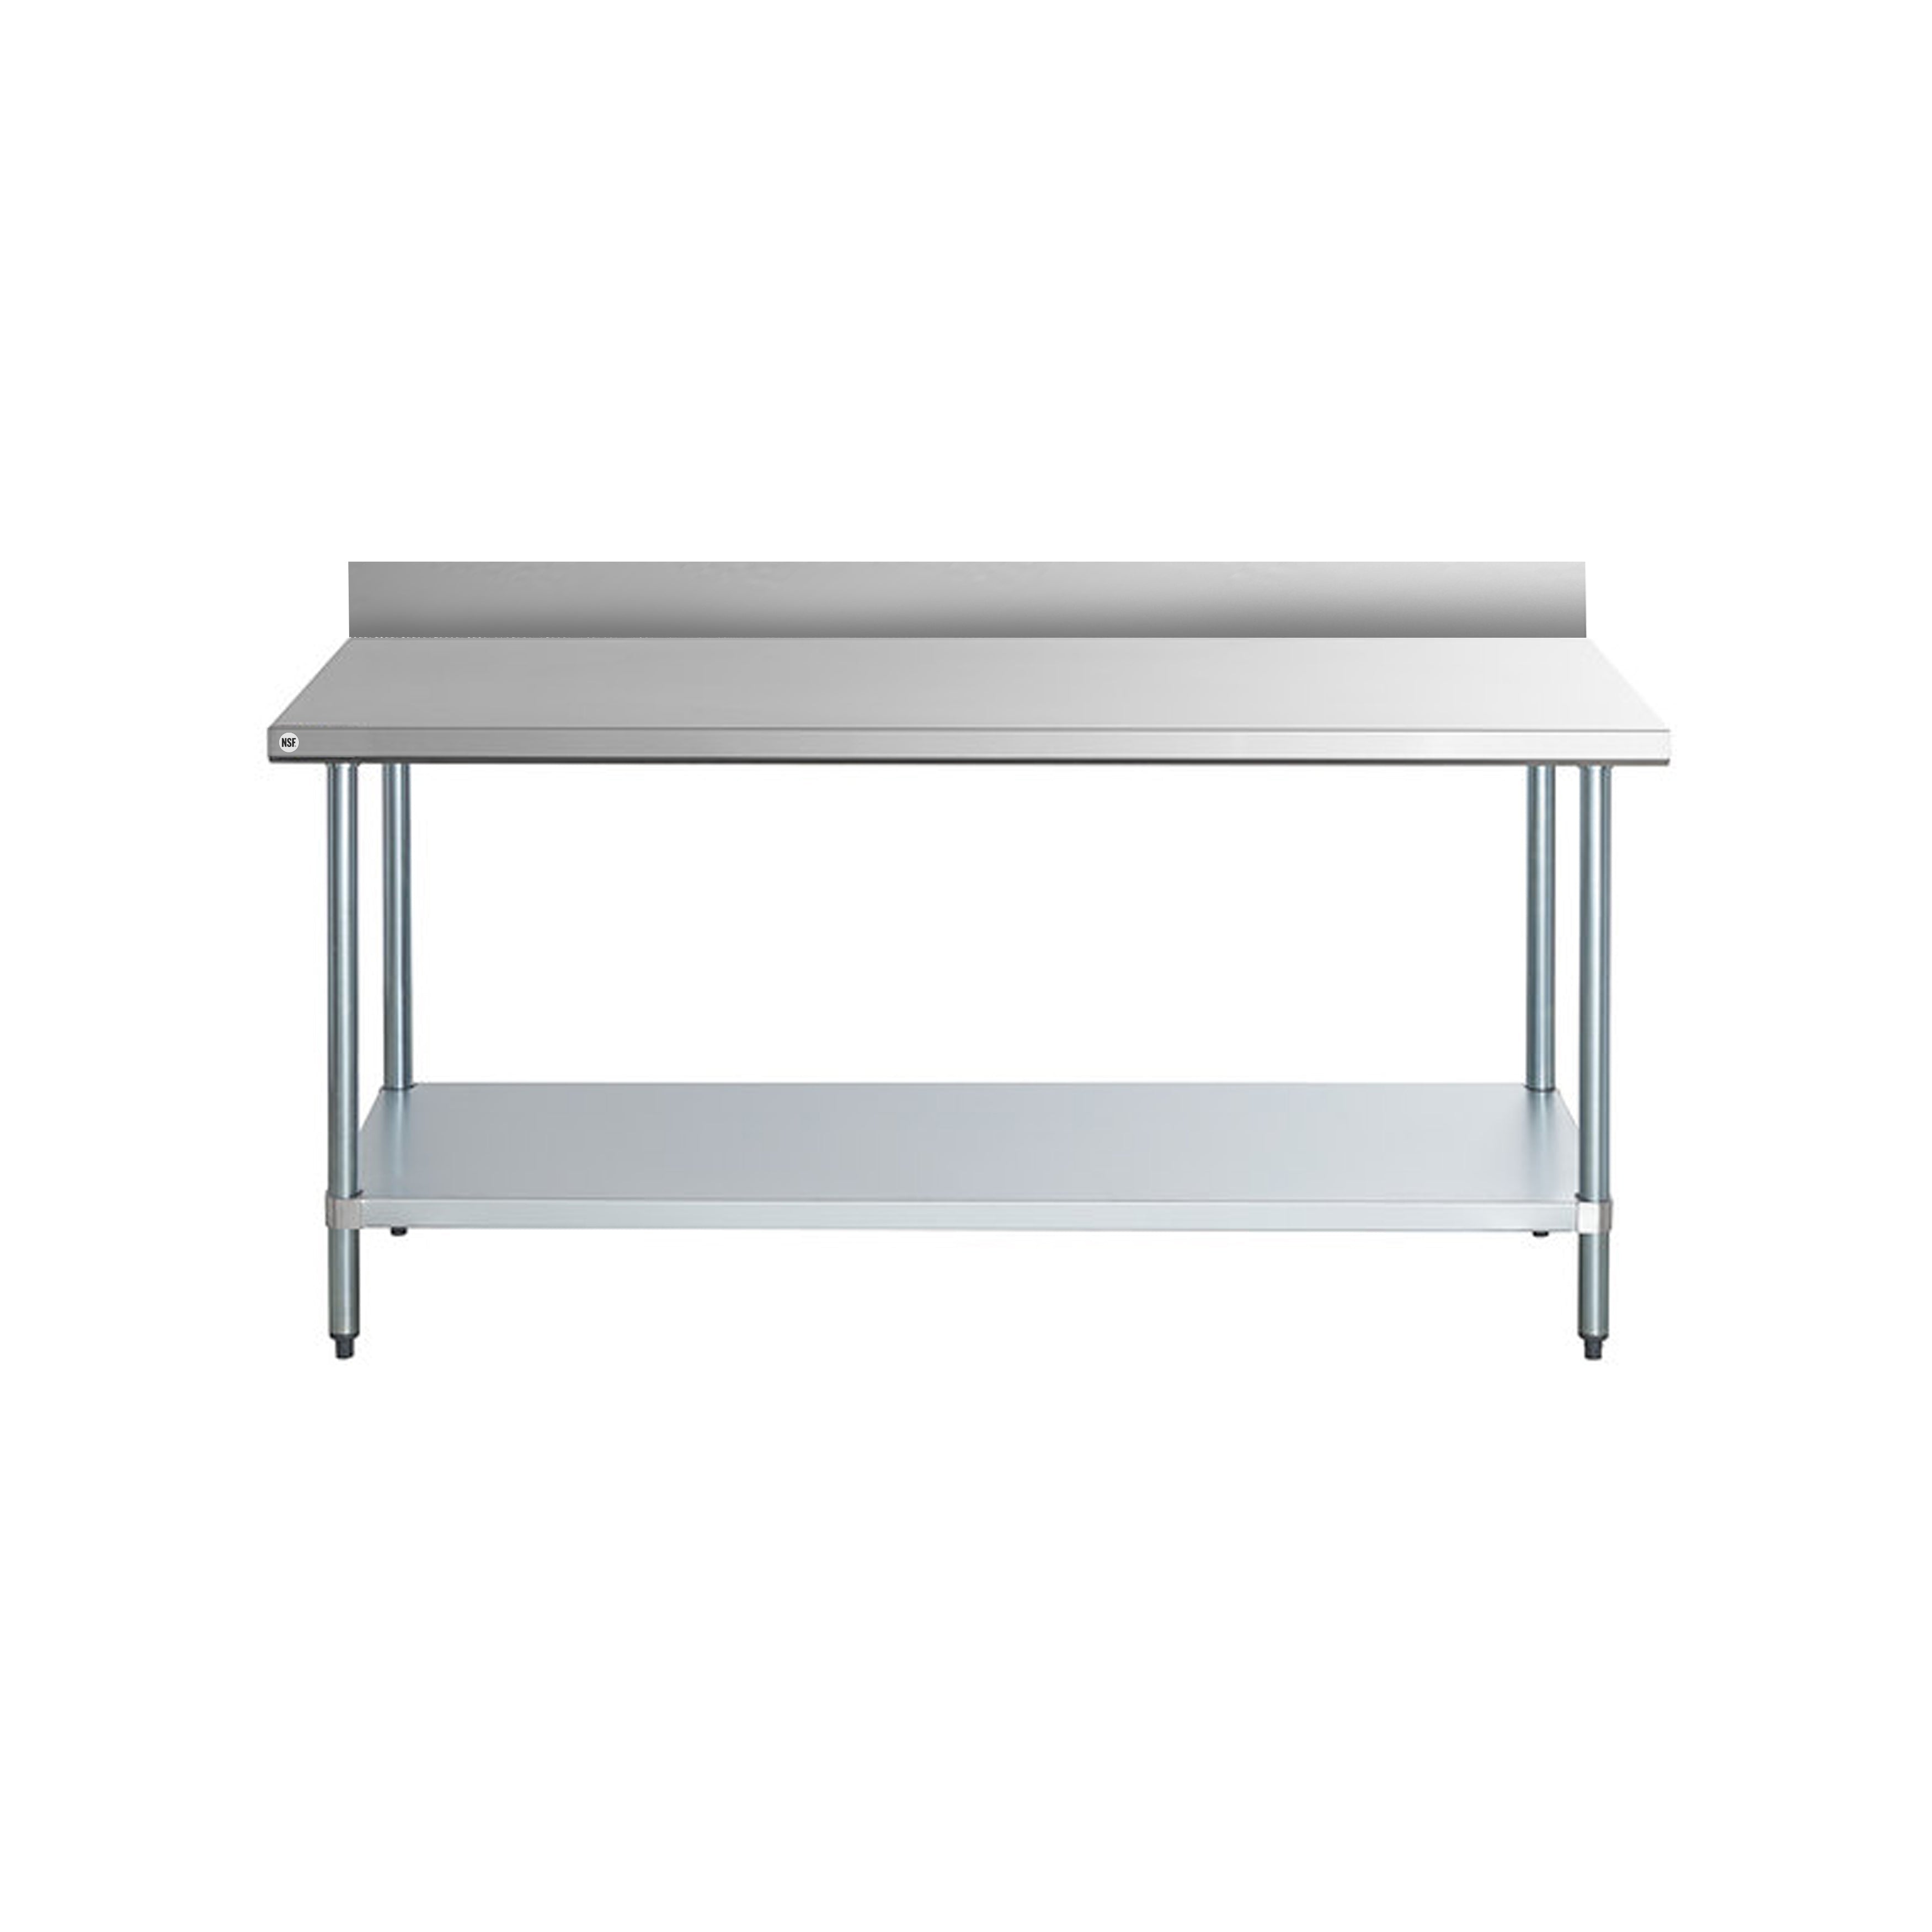 Omcan - 23795, Commercial 36" x 24" Stainless Steel Kitchen Work Table with 4" Back Splash 900lbs Medium Duty